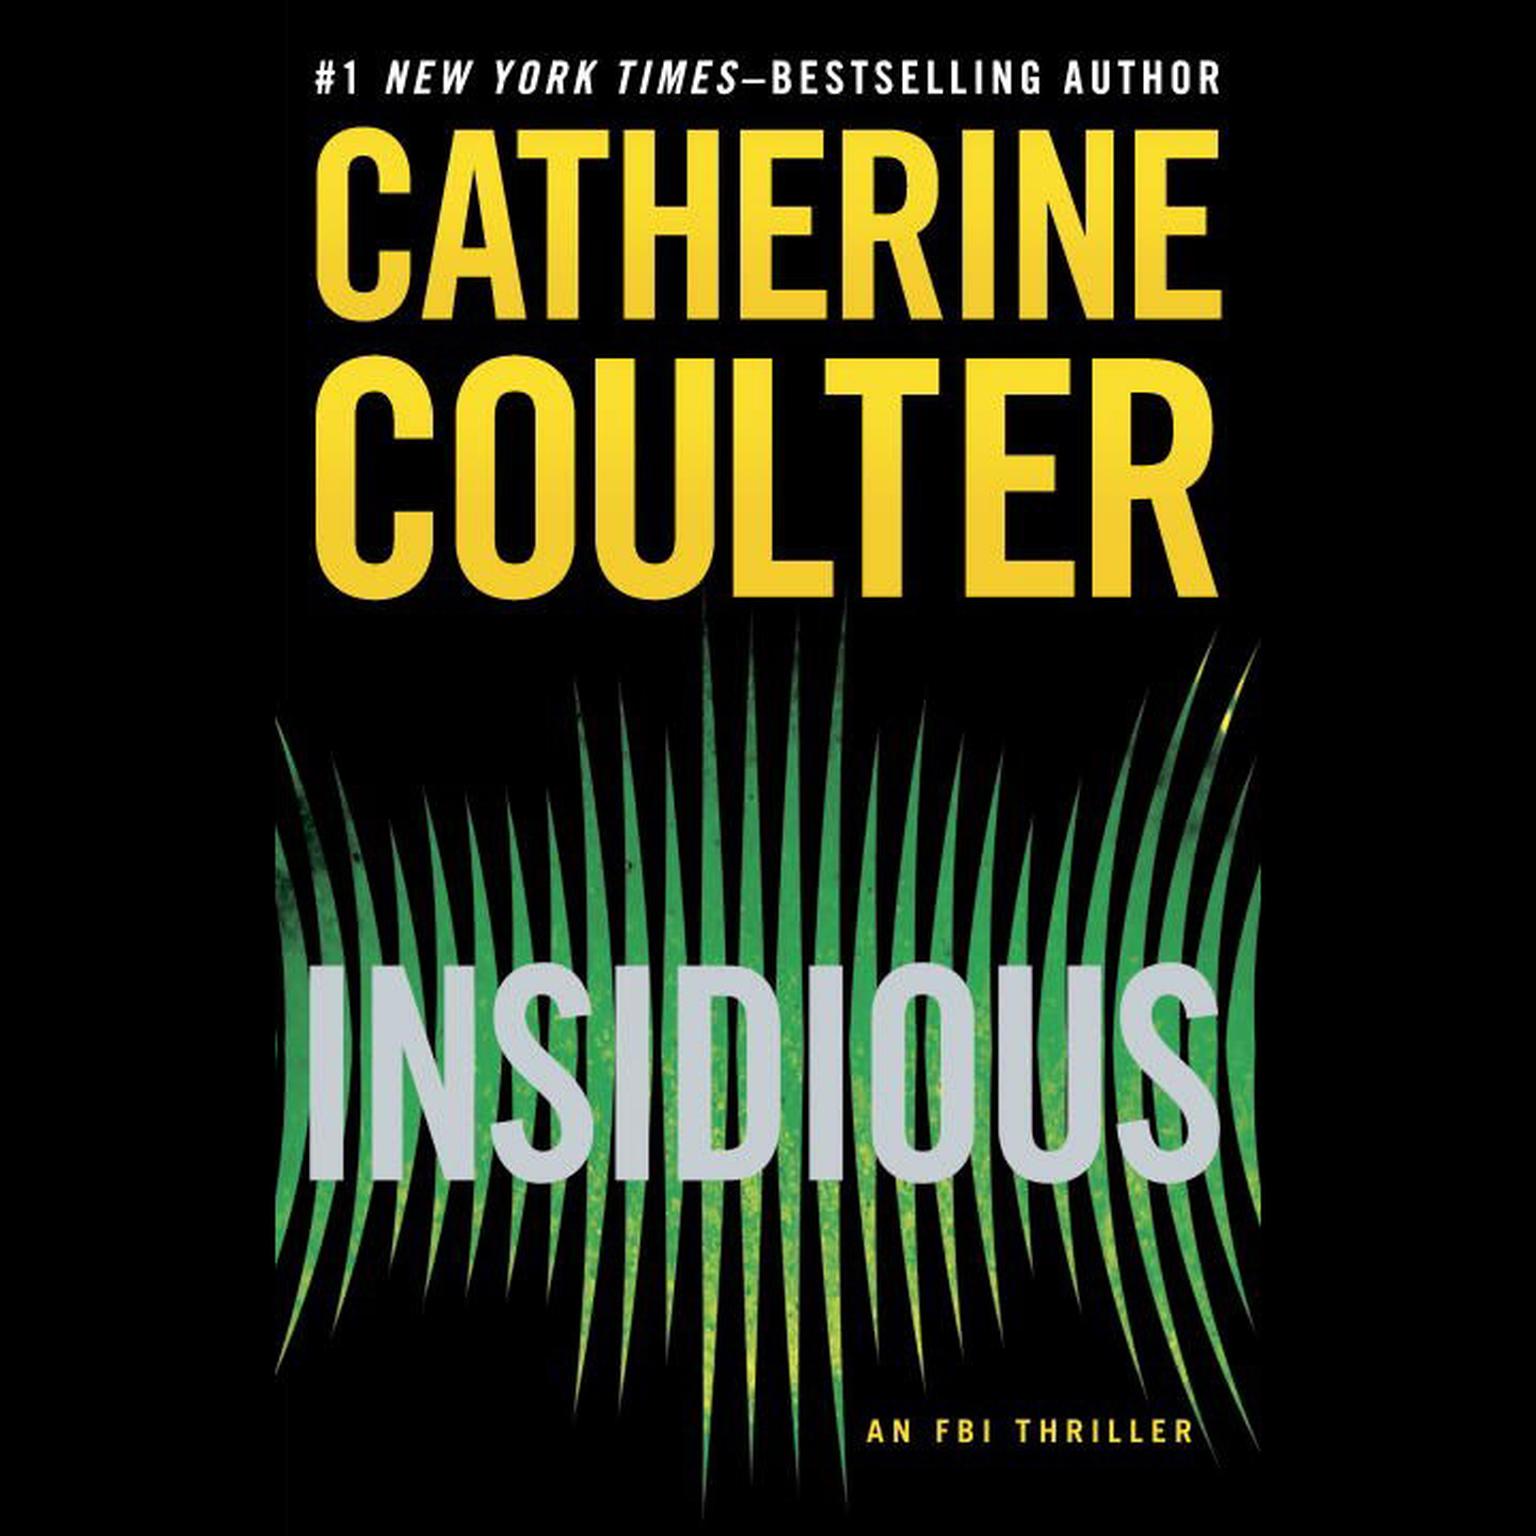 Insidious (Abridged) Audiobook, by Catherine Coulter